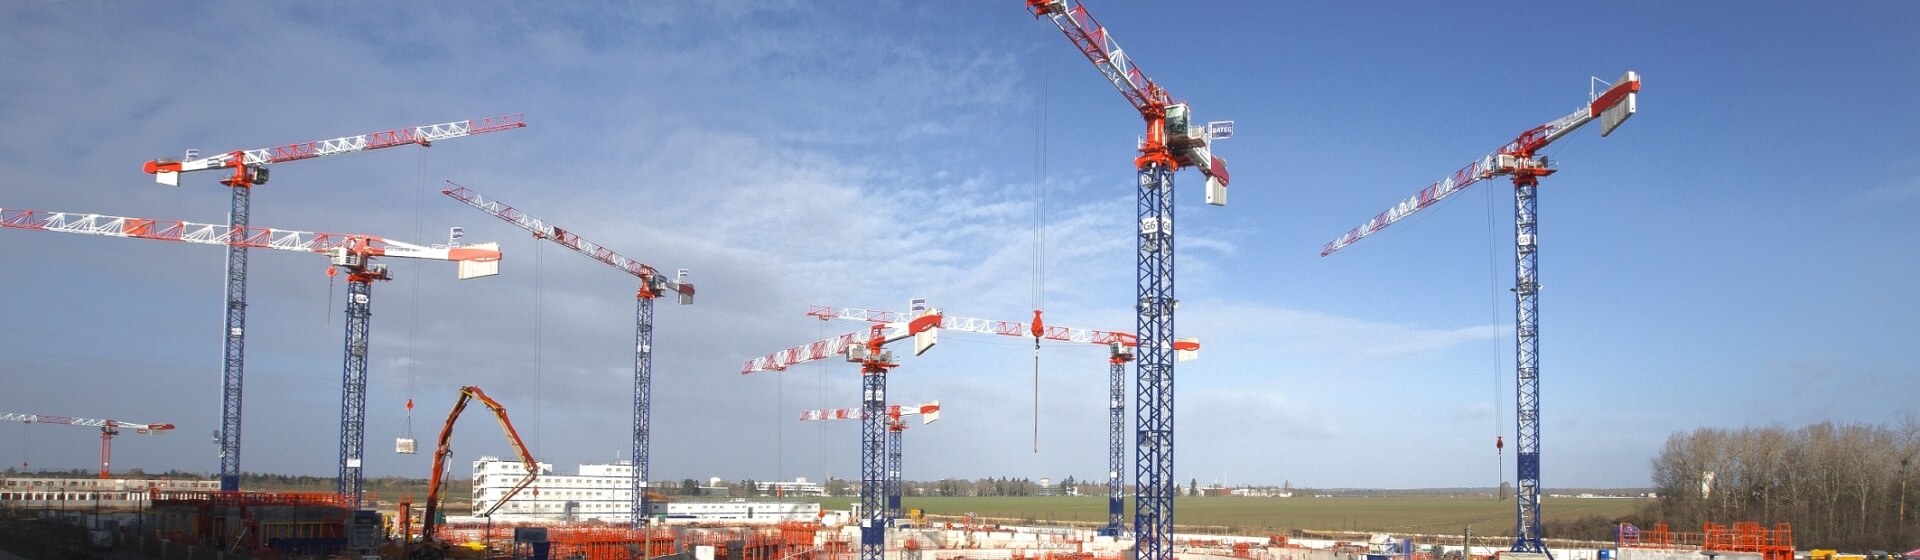 Eight-Potain-MDT-389-cranes-speed-construction-of-cutting-edge-medical-research-facility-01.jpg